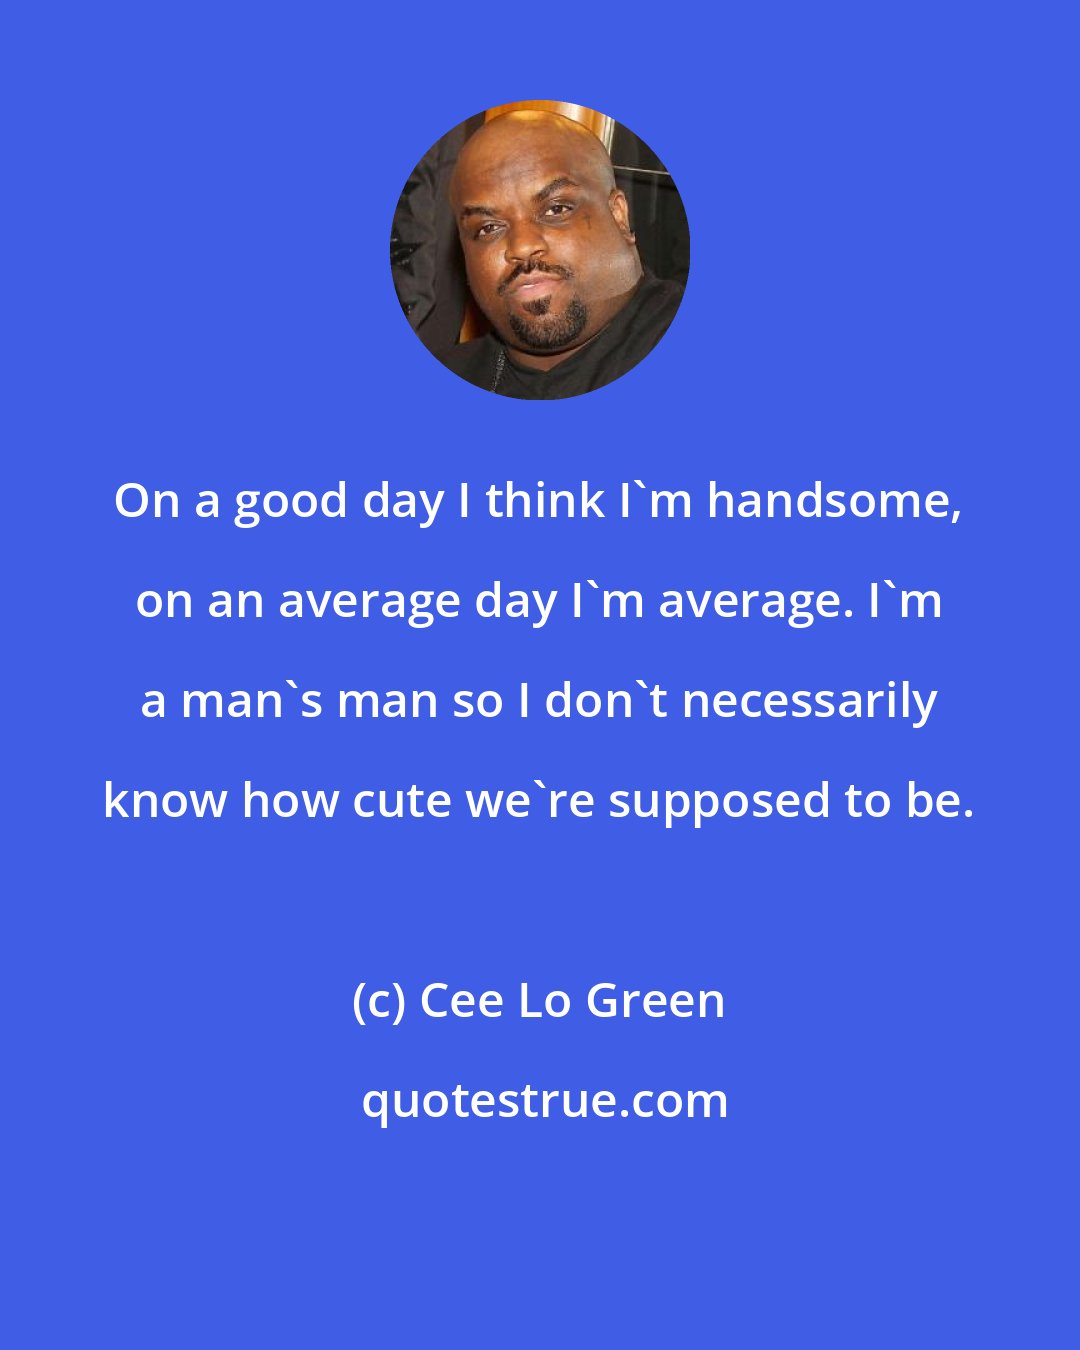 Cee Lo Green: On a good day I think I'm handsome, on an average day I'm average. I'm a man's man so I don't necessarily know how cute we're supposed to be.